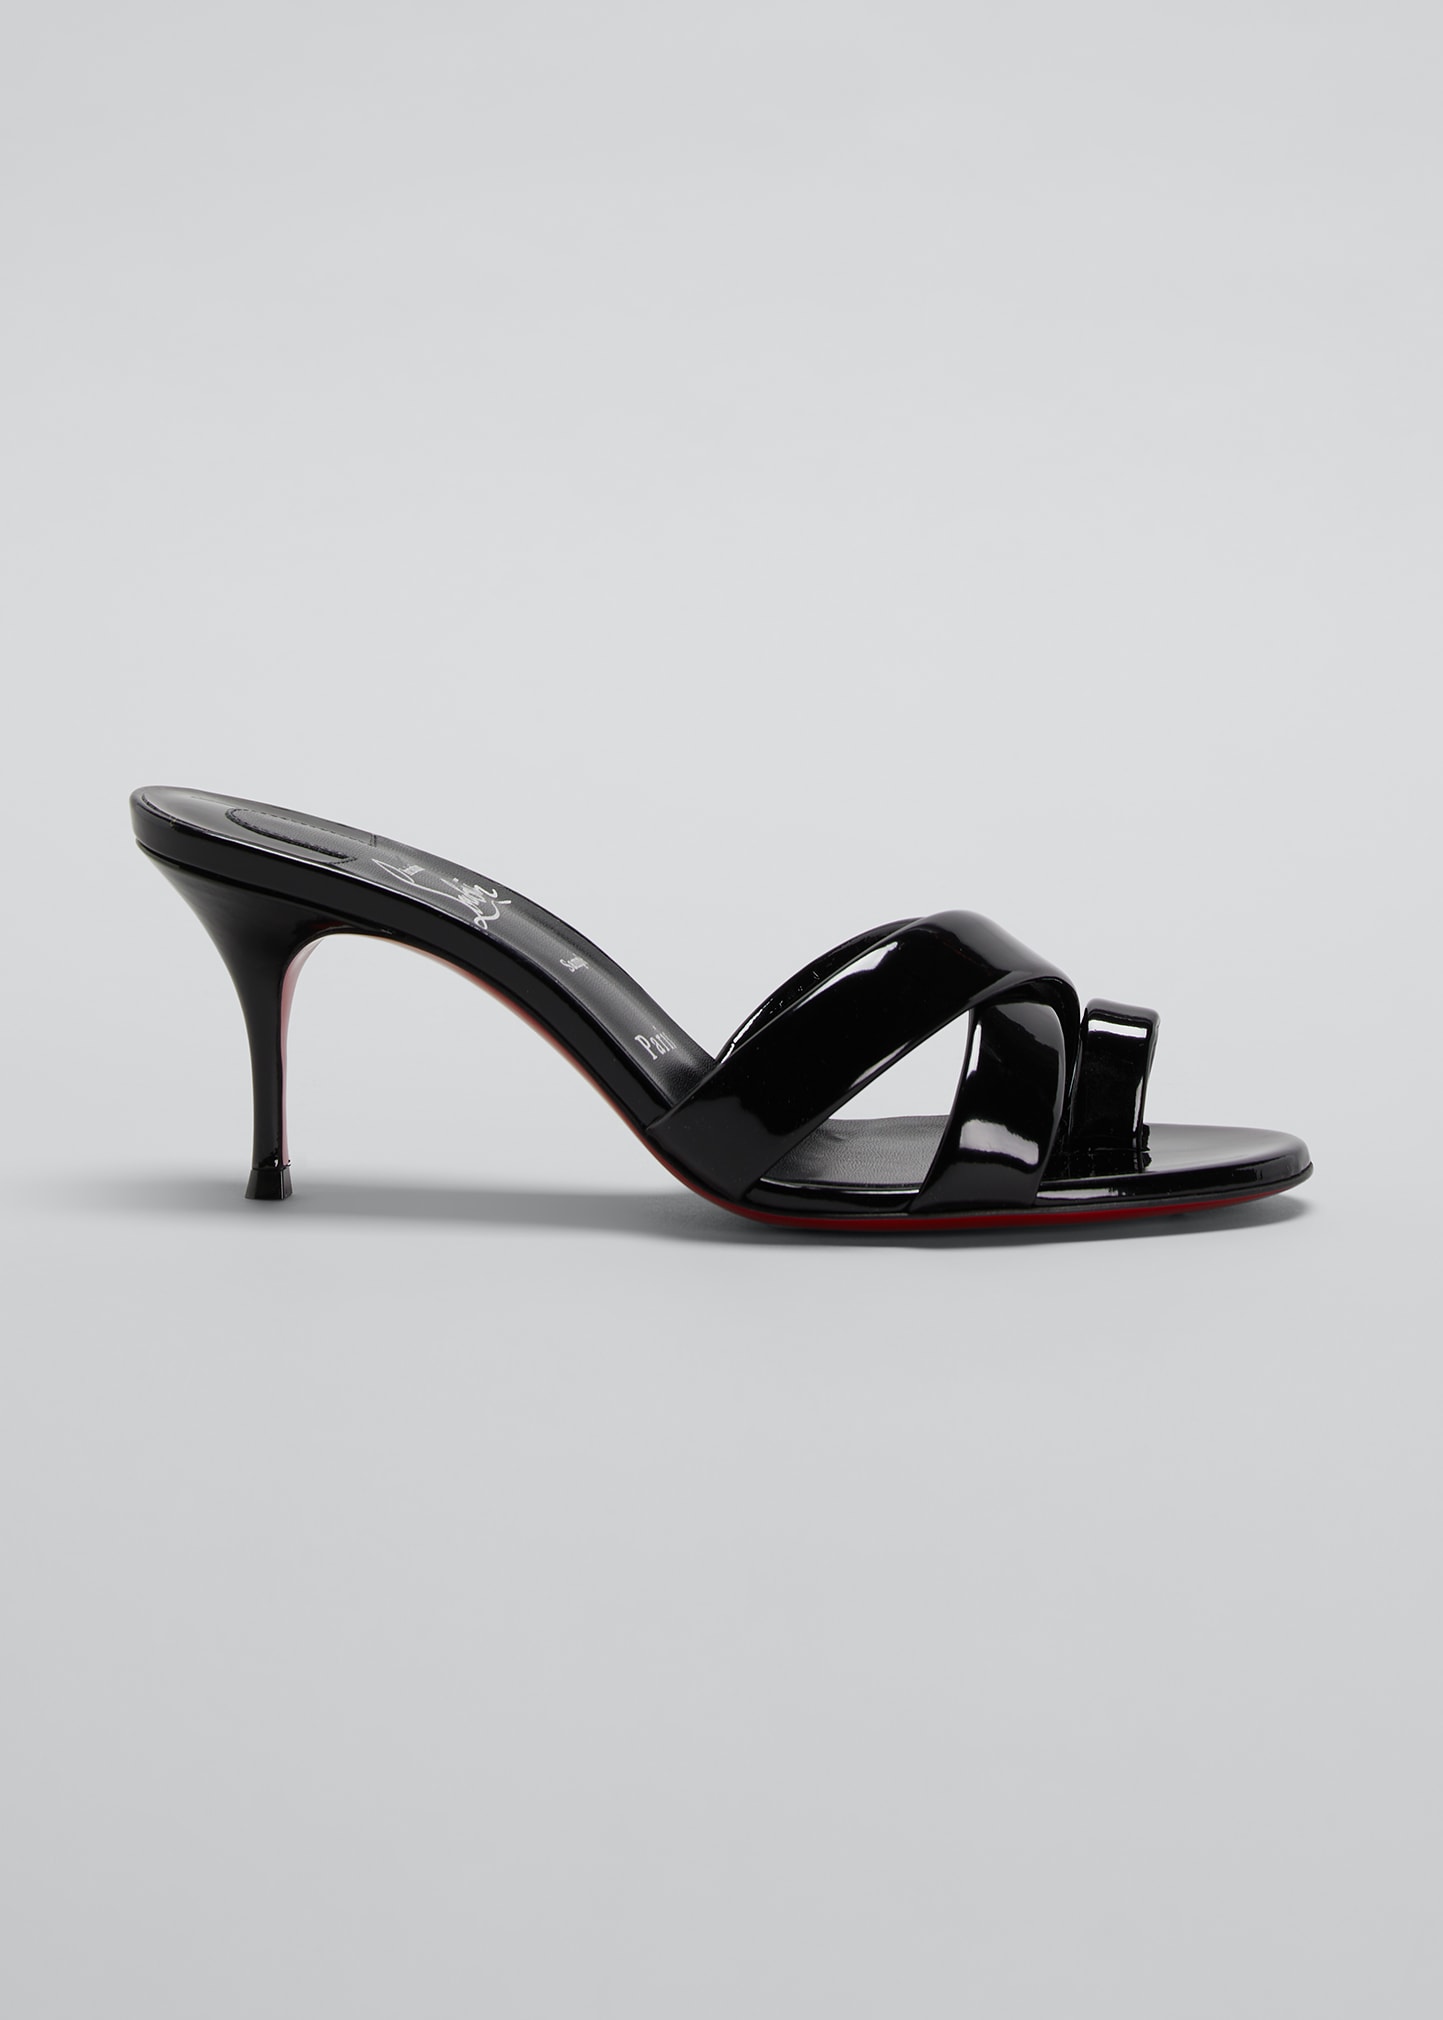 Christian Louboutin Simply Me 70mm Red Sole Sandals In Black